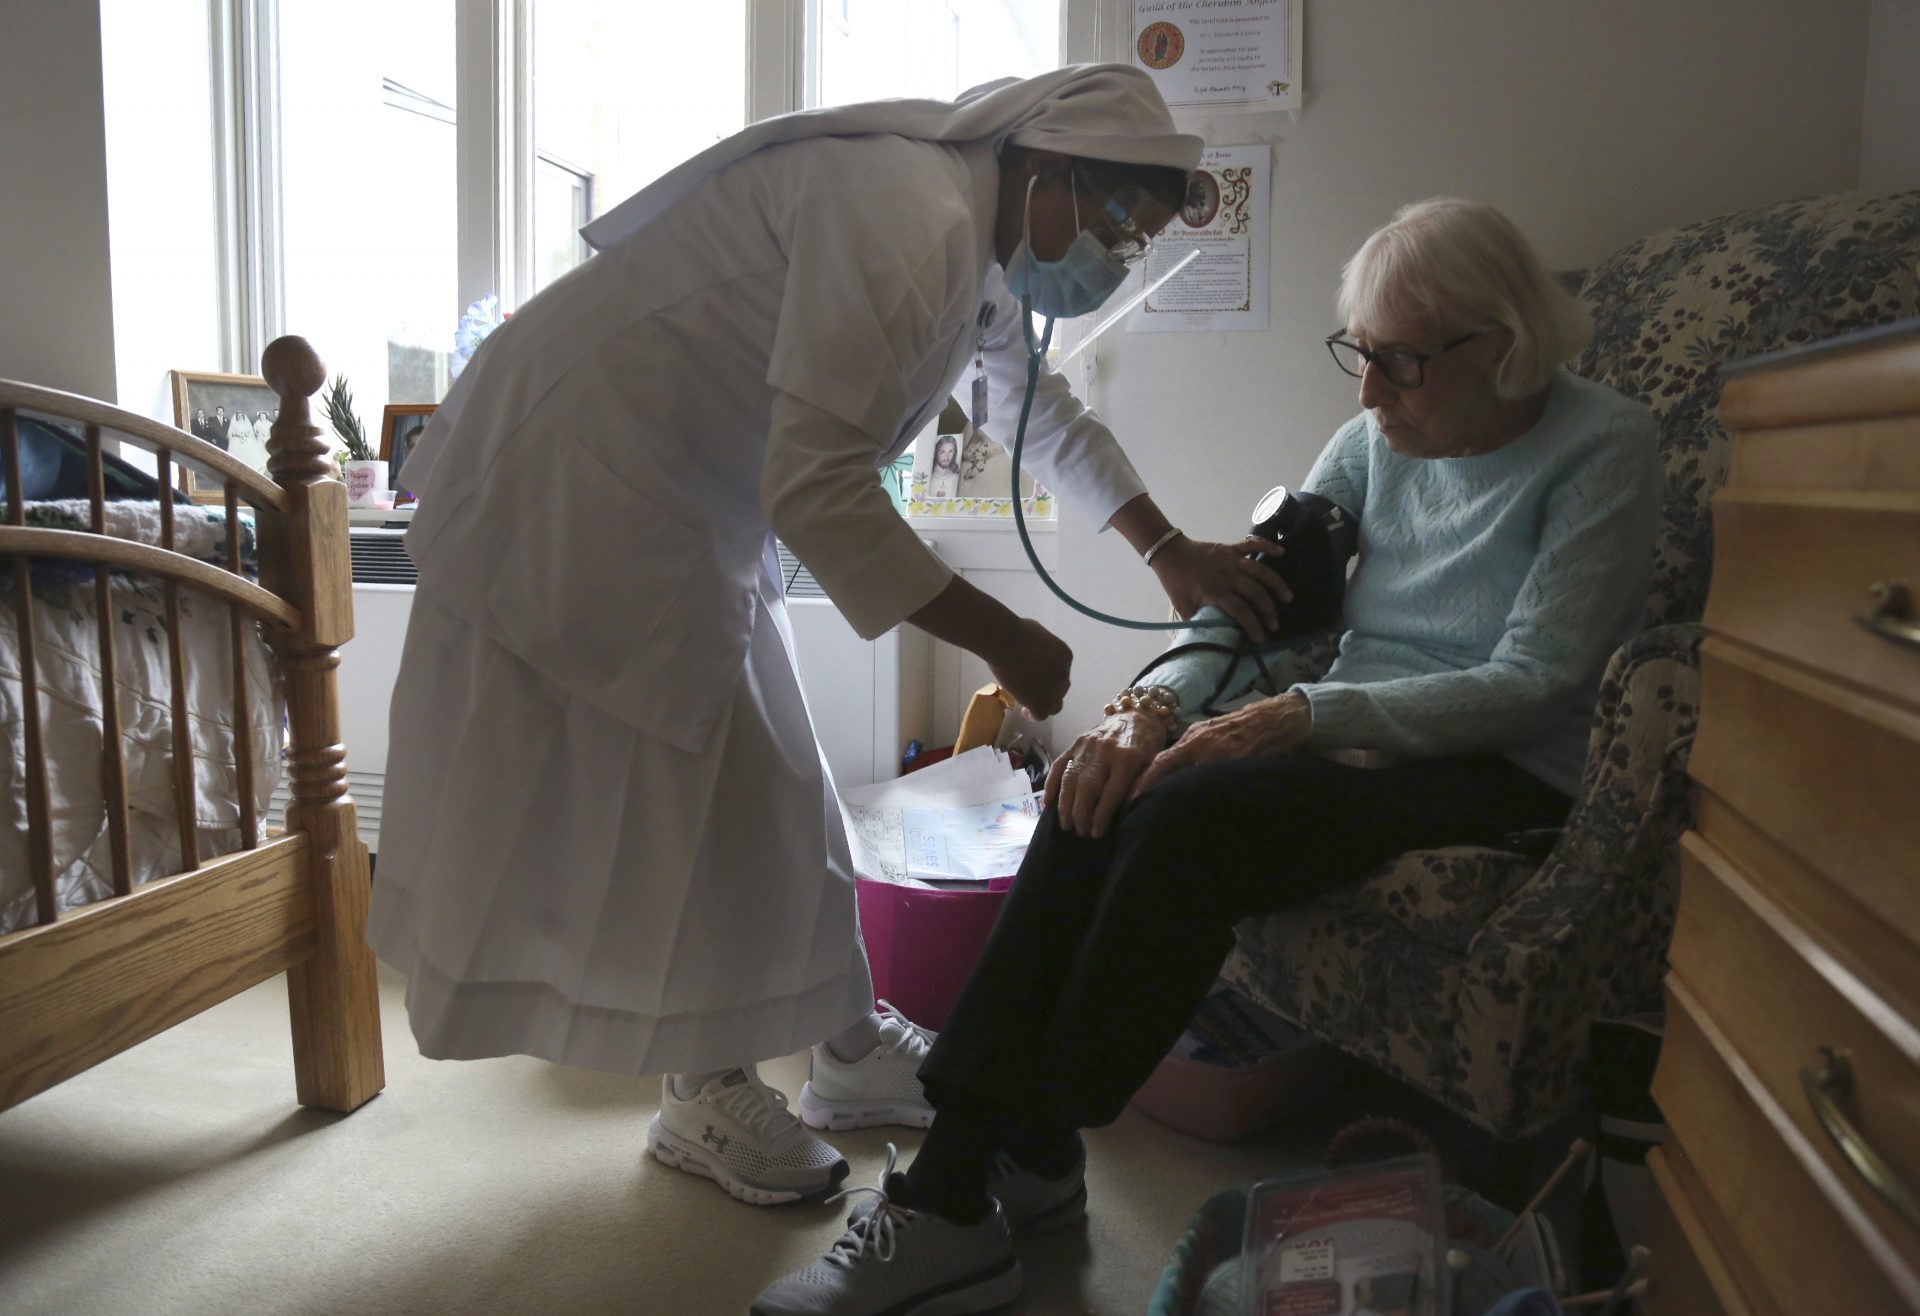 Sister Rose Nellivila checks the blood pressure of Lorraine Catney, a resident of Villa Angela at St. Anne Home nursing facility in Greensburg, Pa., Thursday, March 25, 2021.